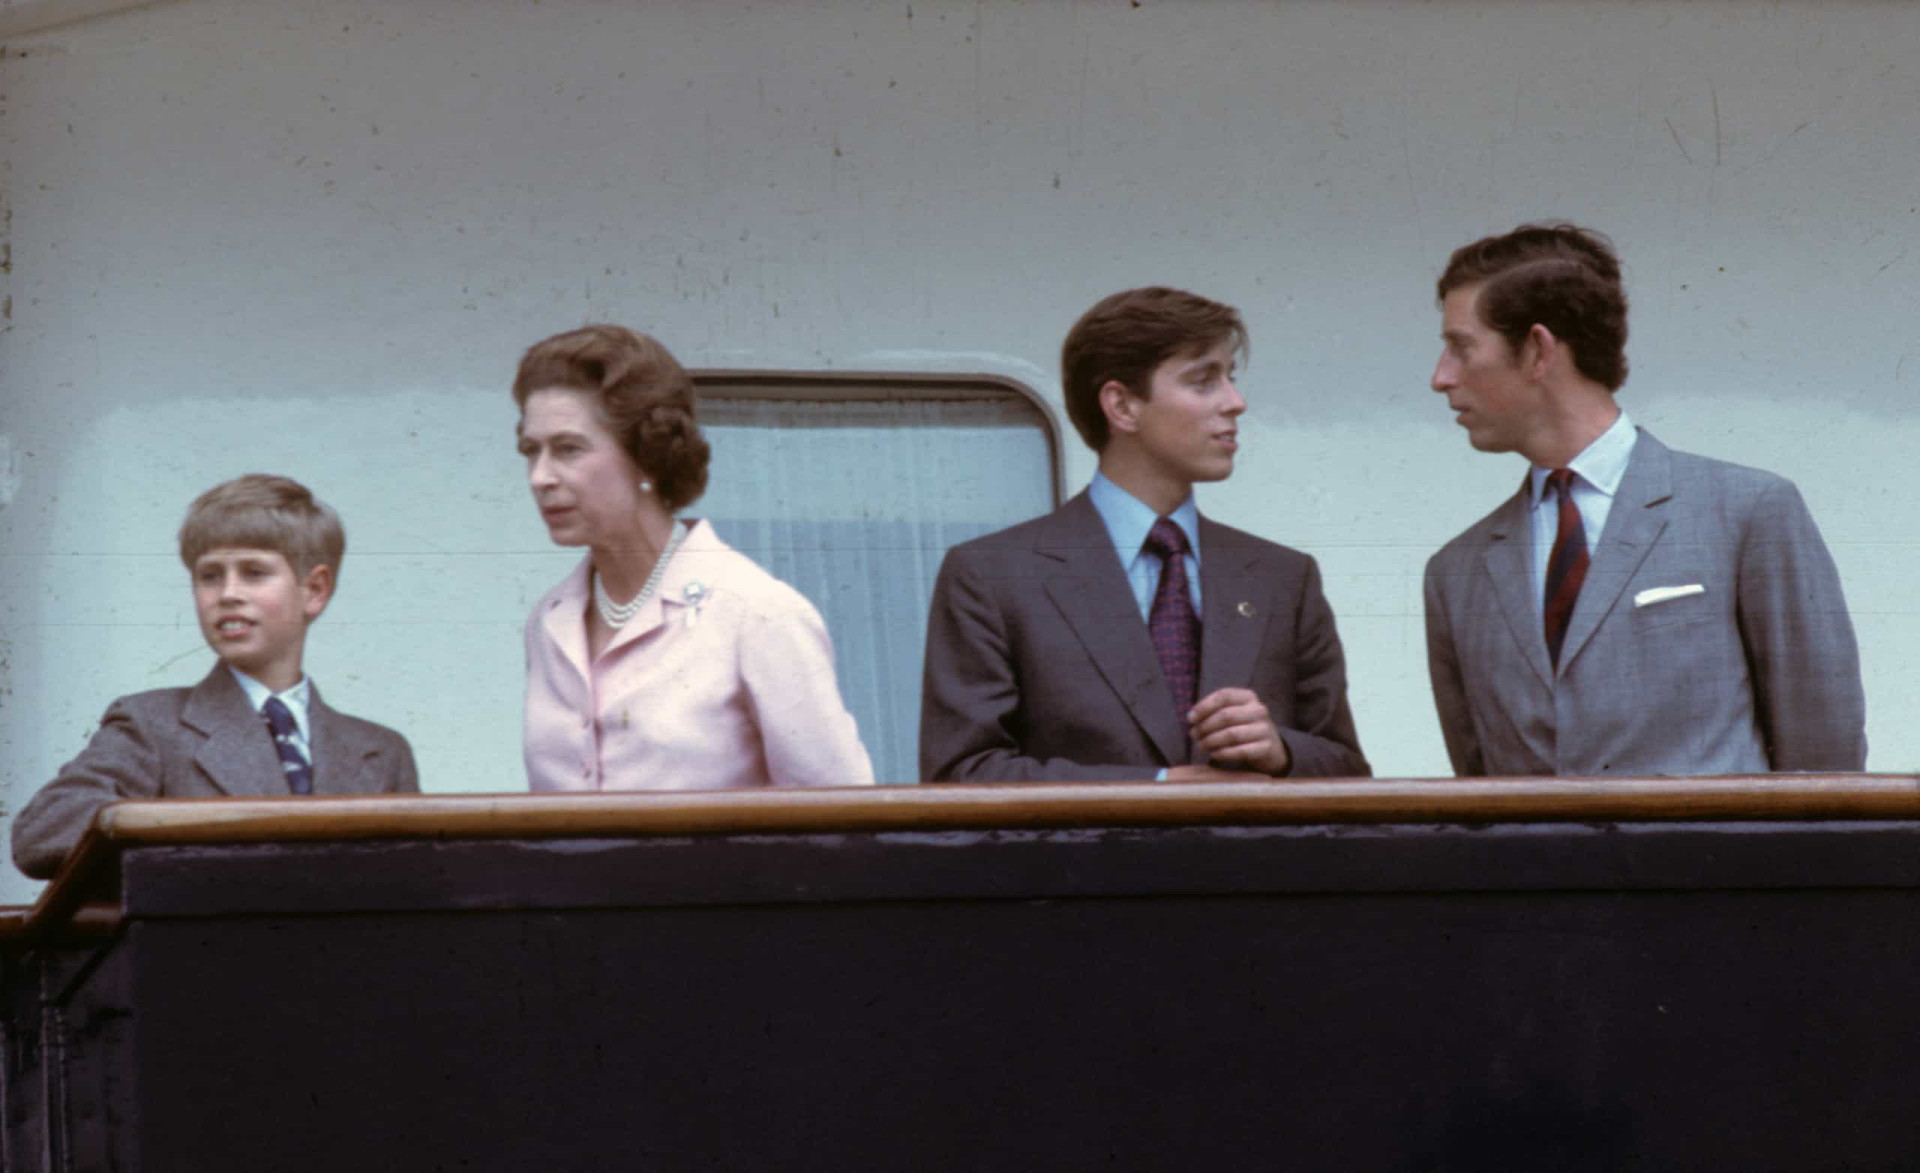 <p>Queen Elizabeth II with her sons Prince Edward, Prince Andrew, and Prince Charles on the deck of the <em>Britannia</em> as they arrive to attend the Olympic Games on July 1, 1976 in Montreal, Canada. Absent is Princess Anne, who was an athlete competing for the British equestrian team at the Summer Olympic Games that year.</p><p><a href="https://www.msn.com/en-ph/community/channel/vid-7xx8mnucu55yw63we9va2gwr7uihbxwc68fxqp25x6tg4ftibpra?cvid=94631541bc0f4f89bfd59158d696ad7e">Follow us and access great exclusive content every day</a></p>